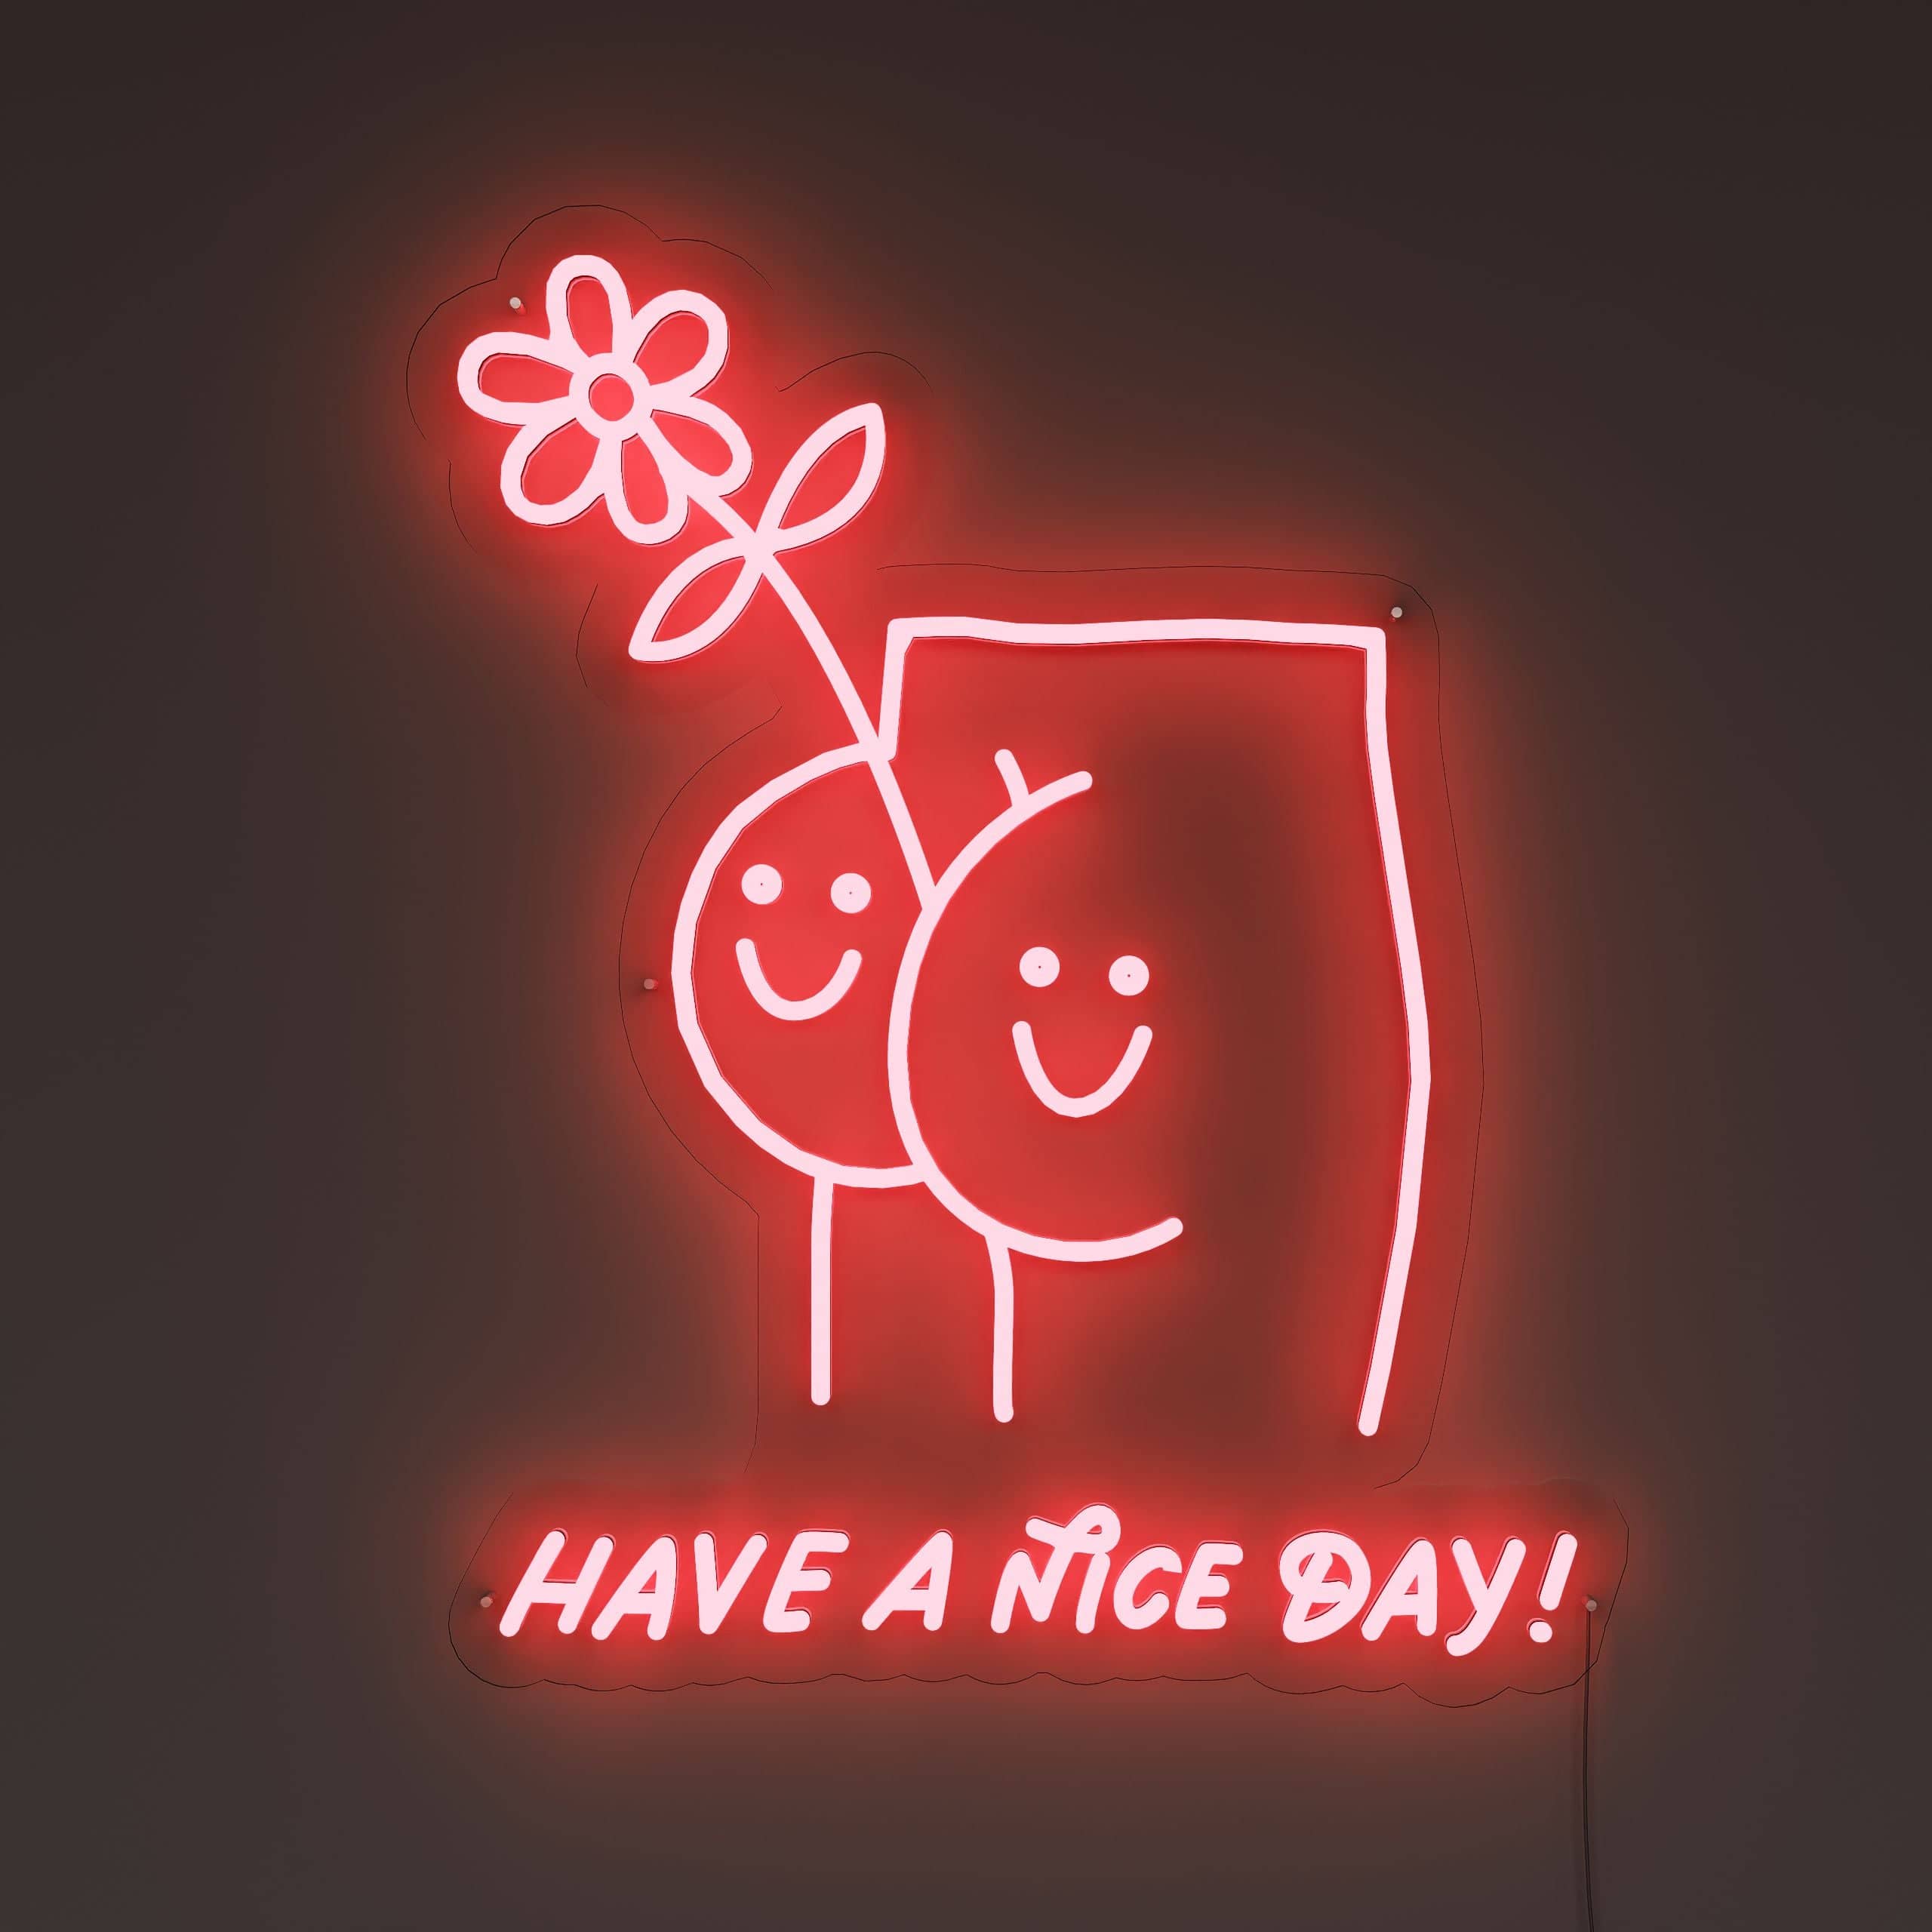 happy-day-wishes-neon-sign-lite